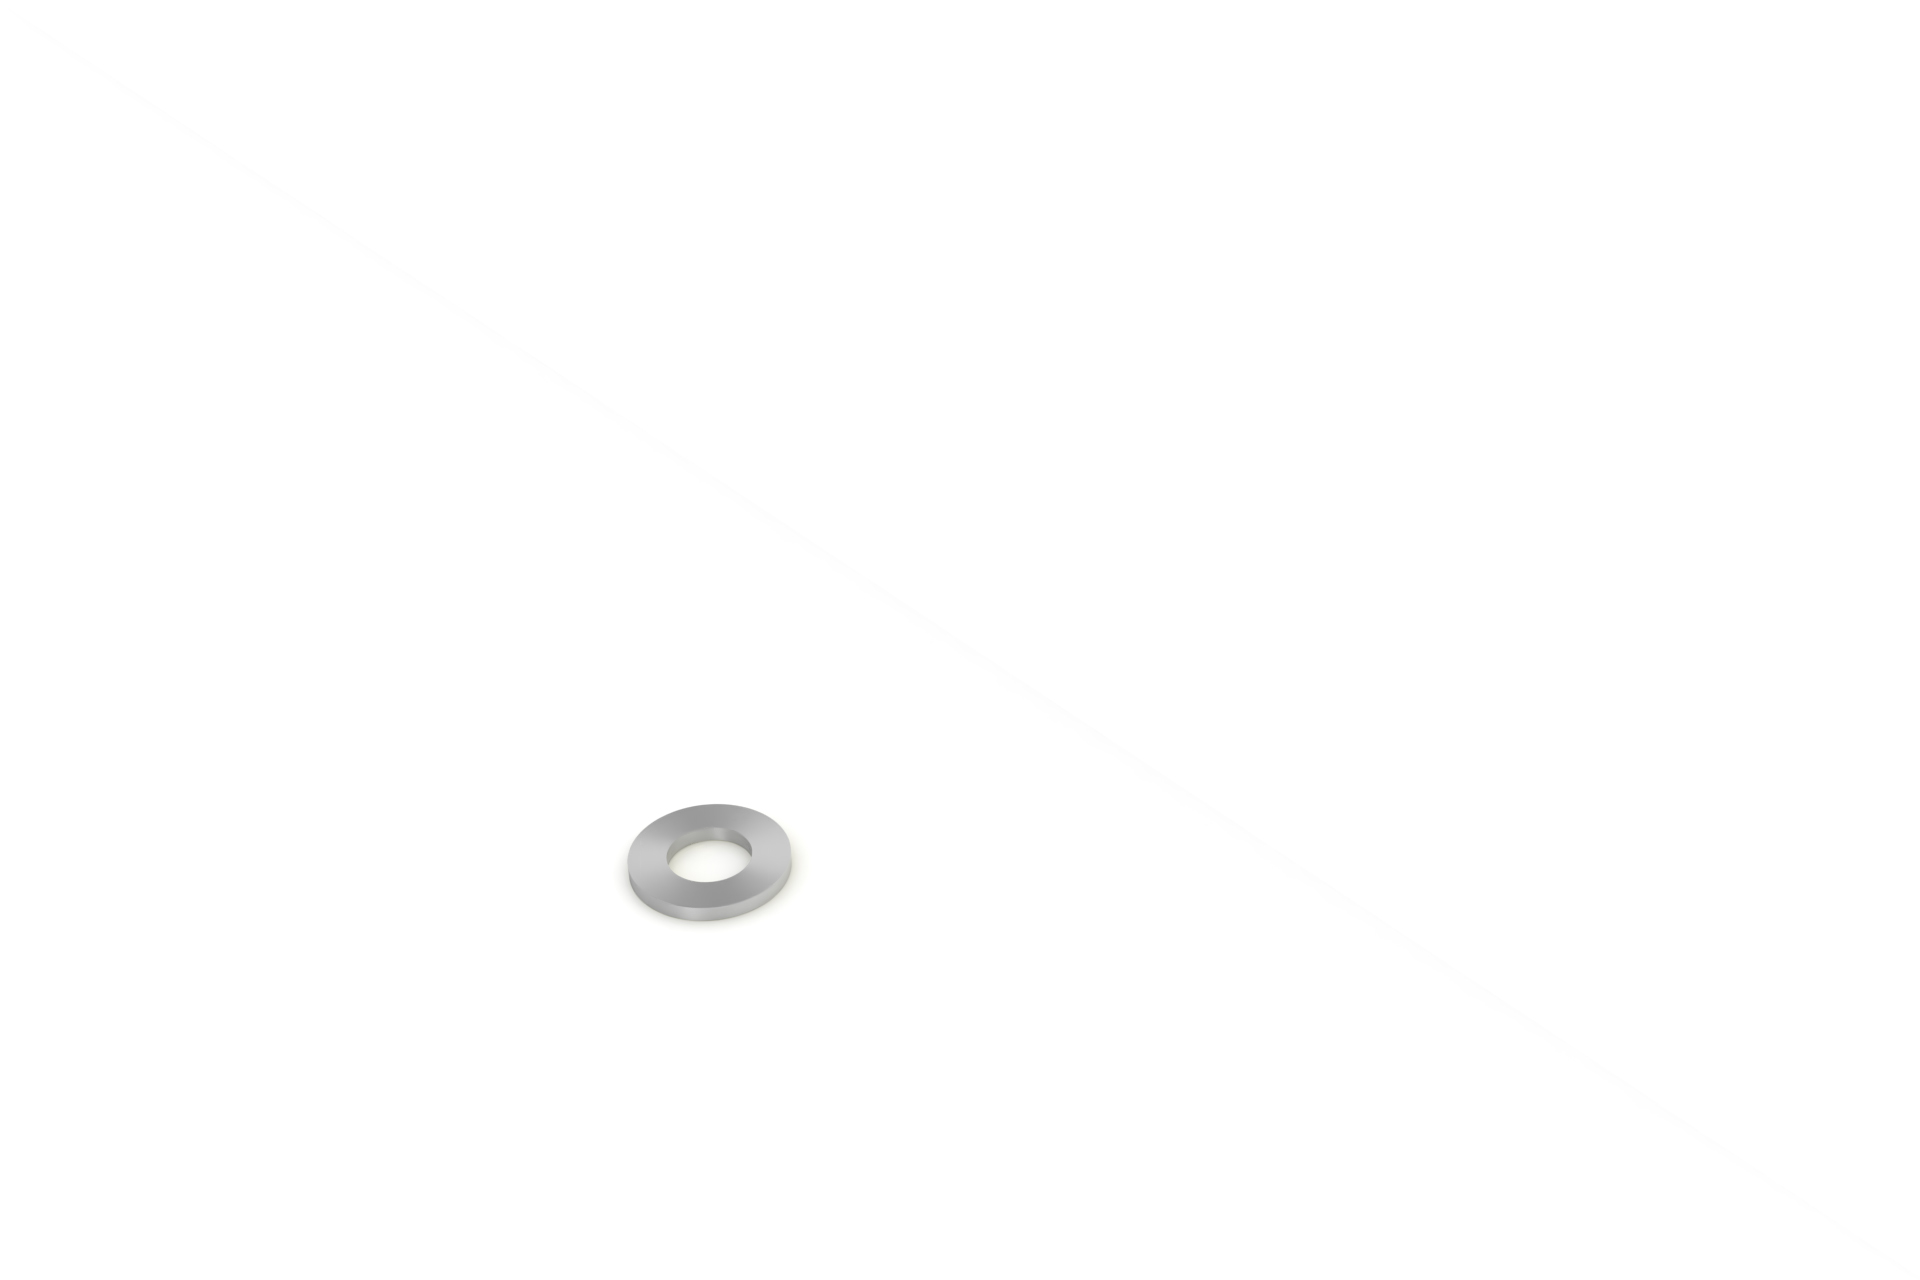 washer ISO 7089, M8, stainless steel 1.4404 (A4)